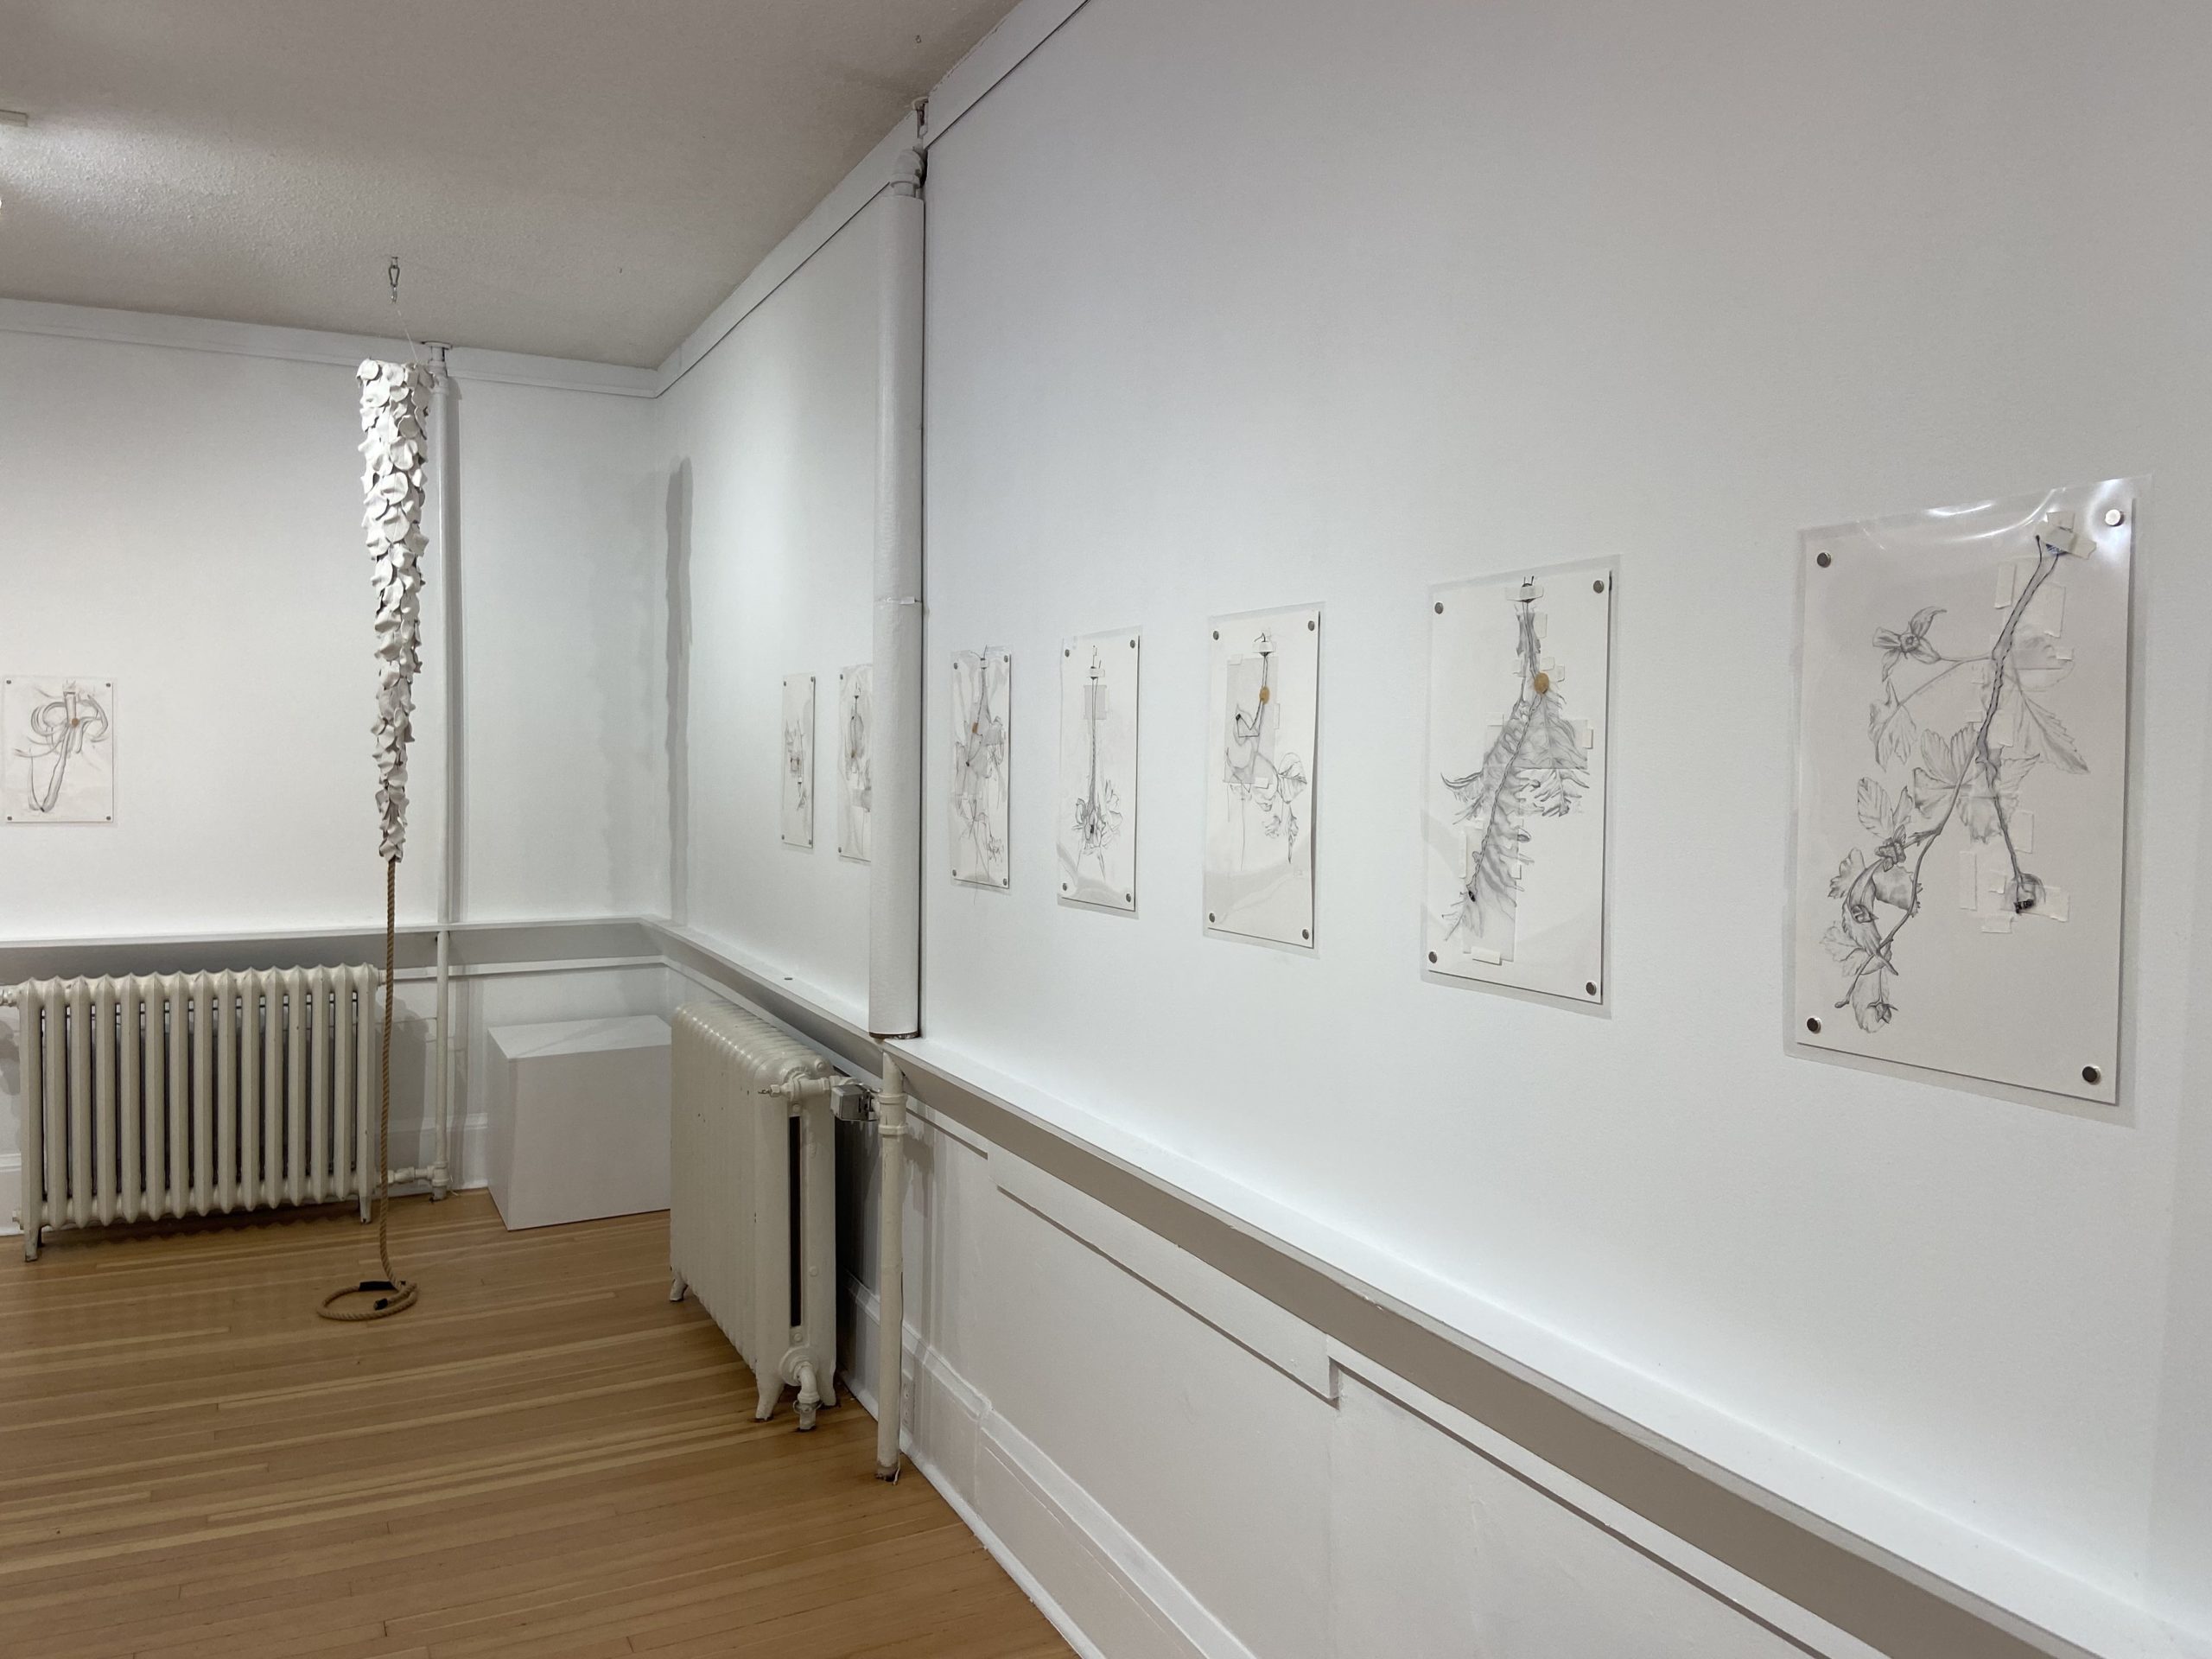 Installation view at the Smithers Art Gallery